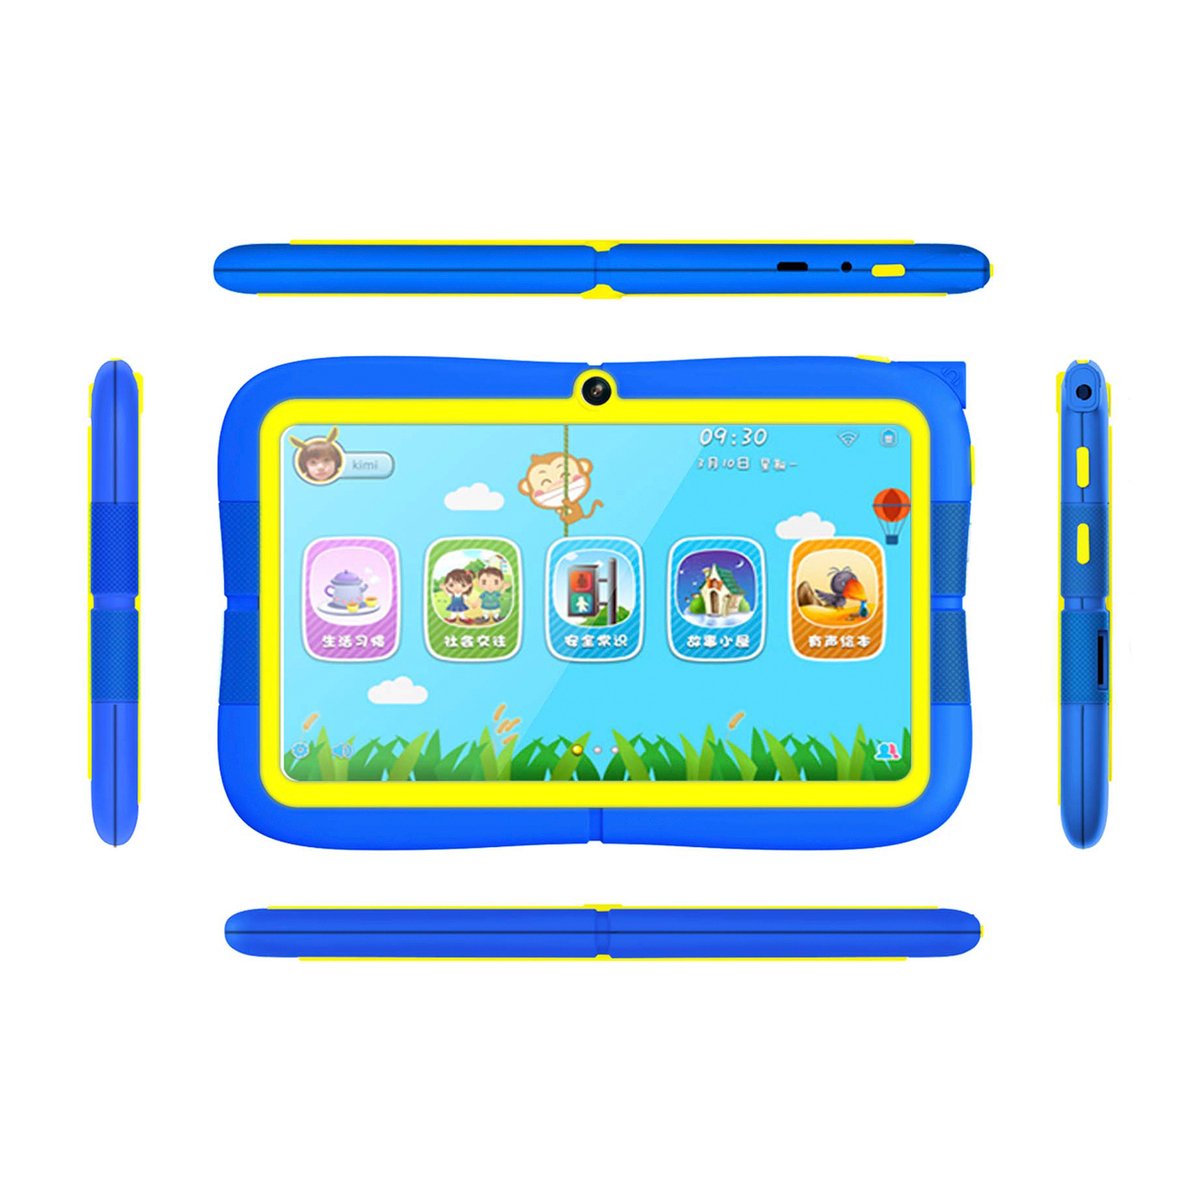 Ikon Kids Tablet IK-WT72 7inches,WiFi, 8GB Flash,1GB RAM, Assorted Color  Online at Best Price, Tablets